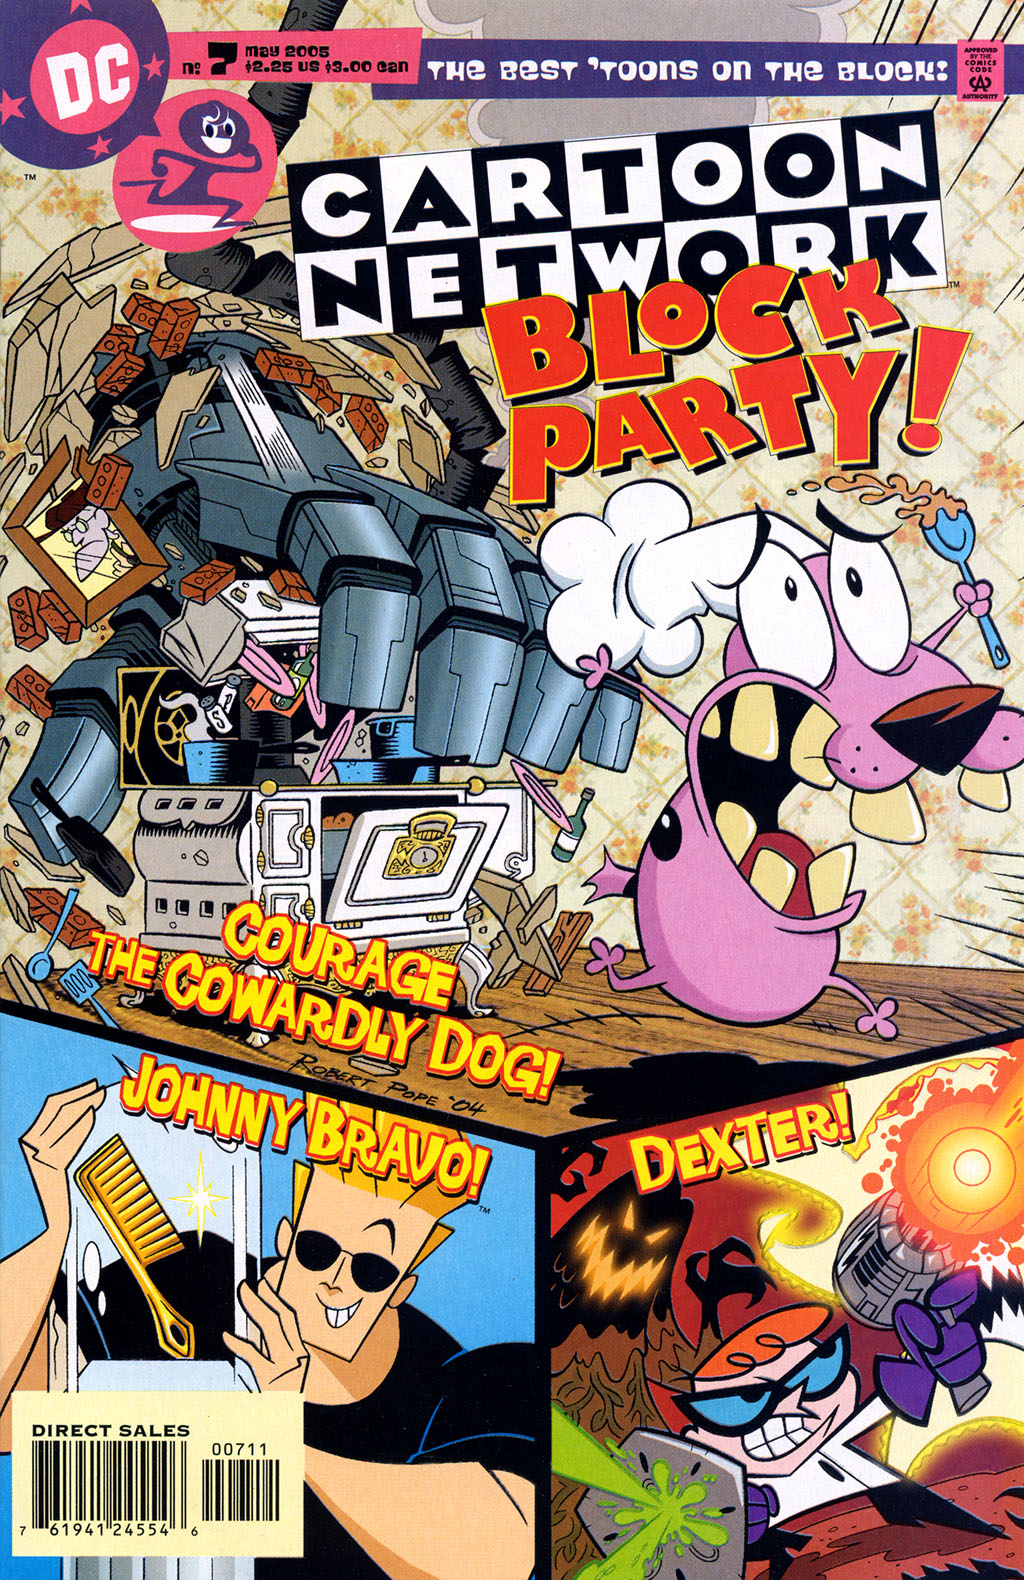 Read online Cartoon Network Block Party comic -  Issue #7 - 1